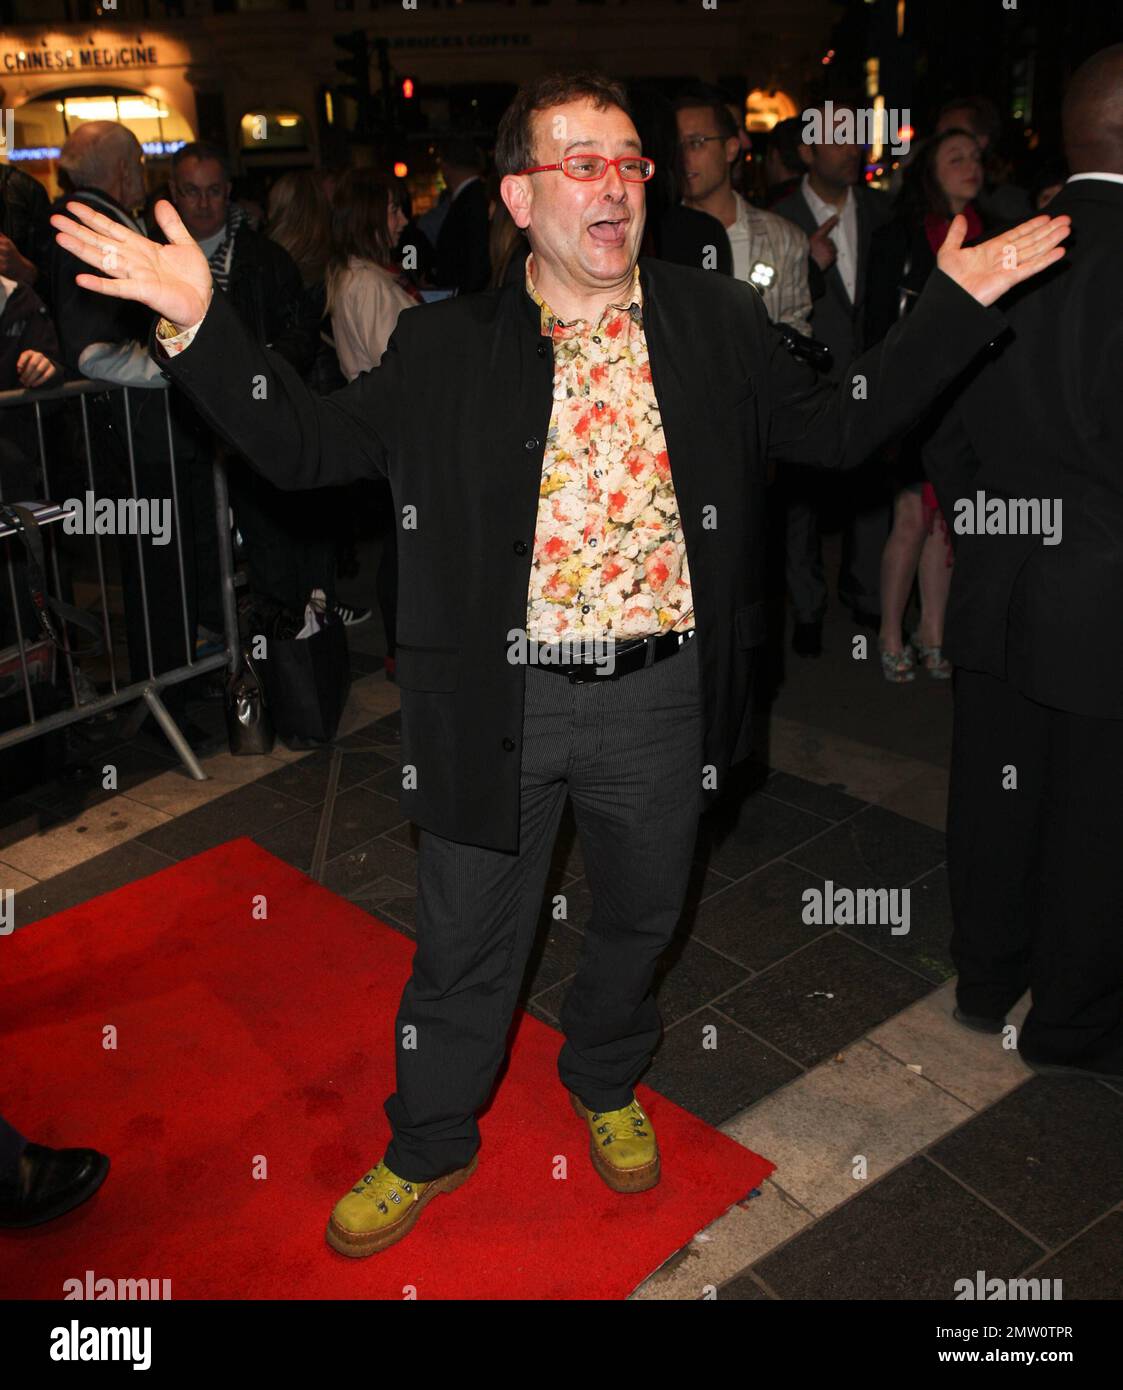 Timmy Mallet at 'The Umbrellas of Cherbourg' press night at the Gielgud Theatre in London, UK. 3/22/11. Stock Photo